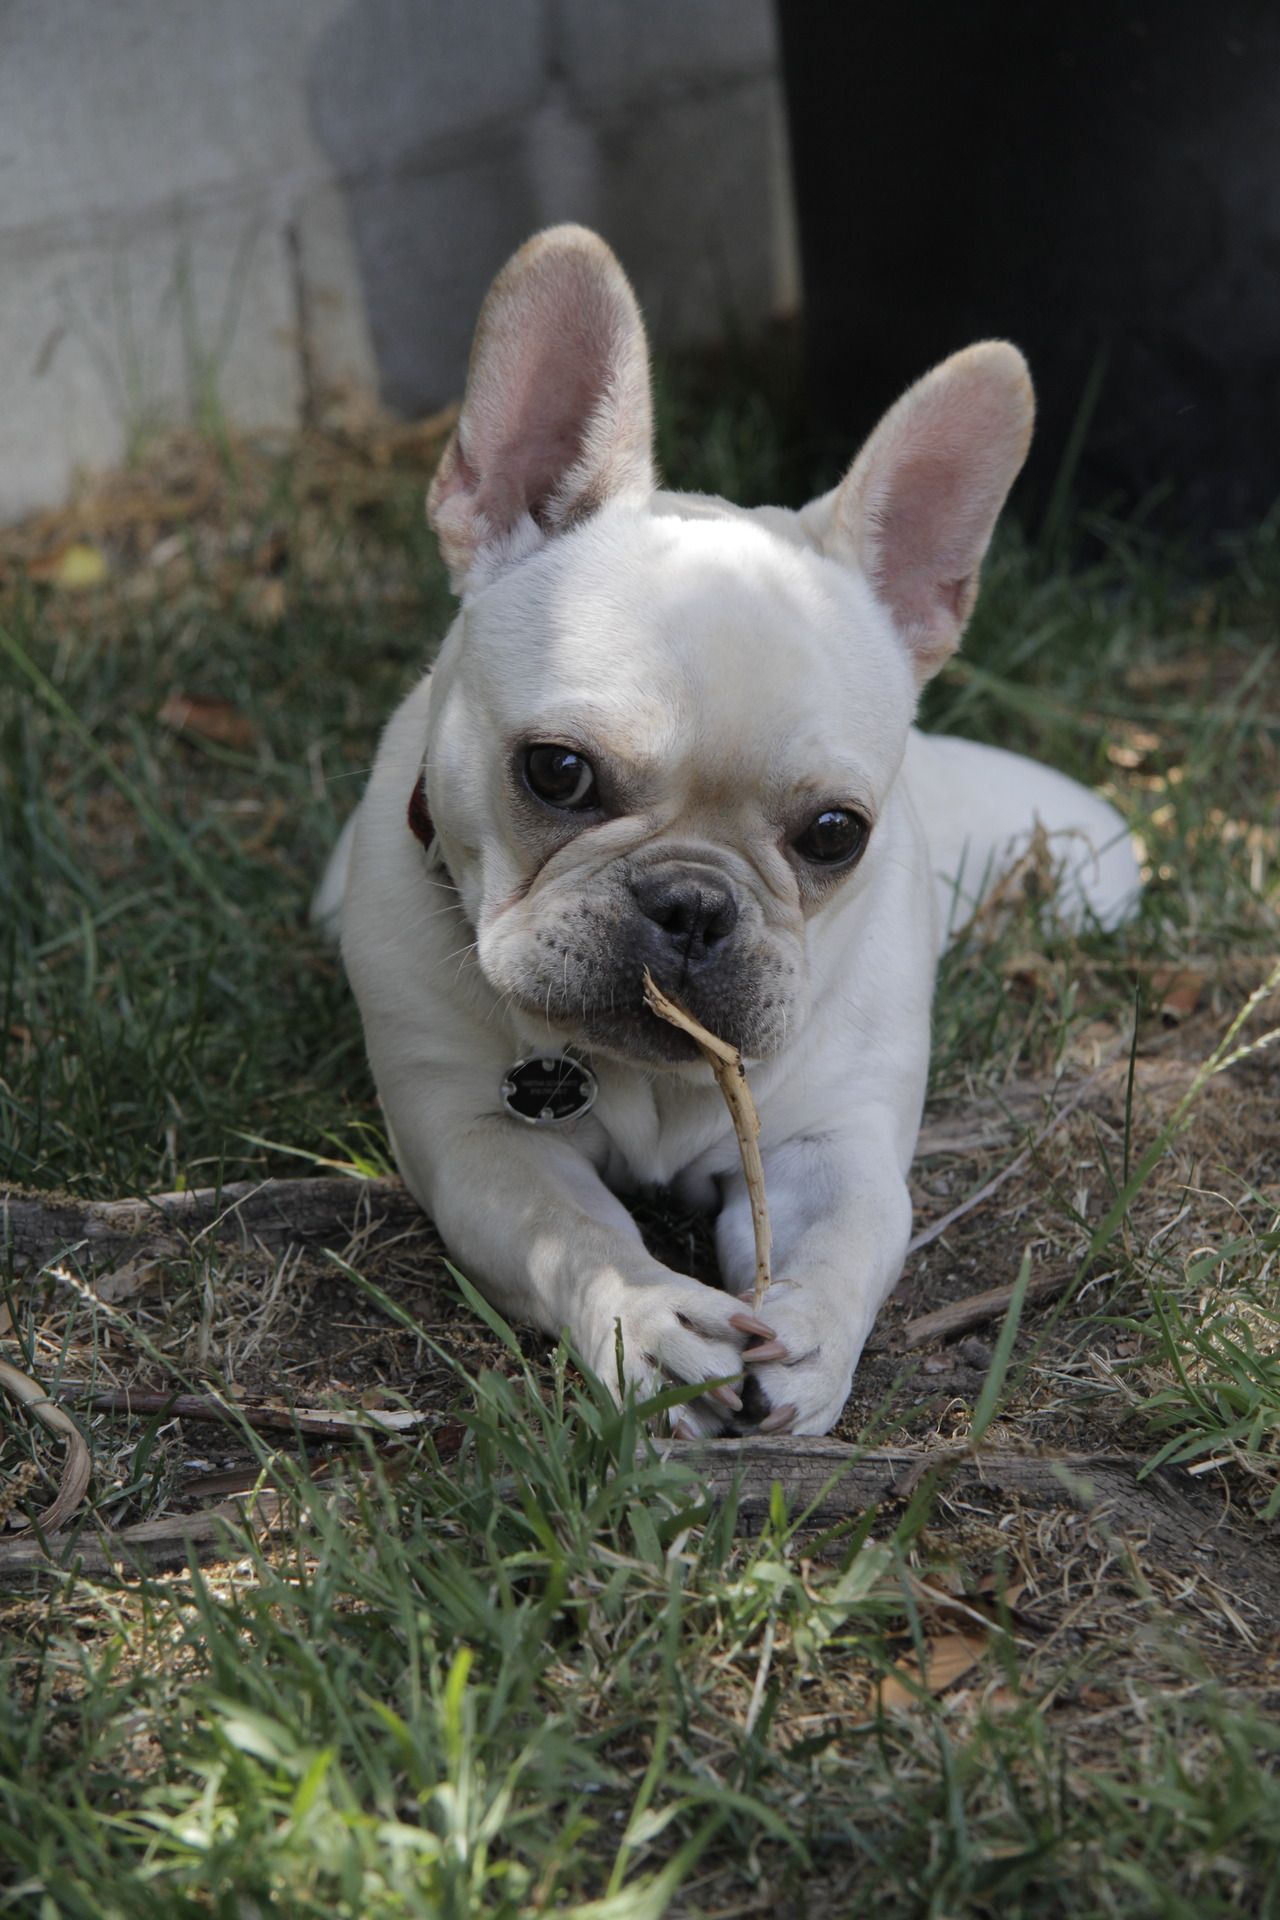 dailyfrenchie:  “ This is Lily, our 9 month old frenchie.  She likes eating st